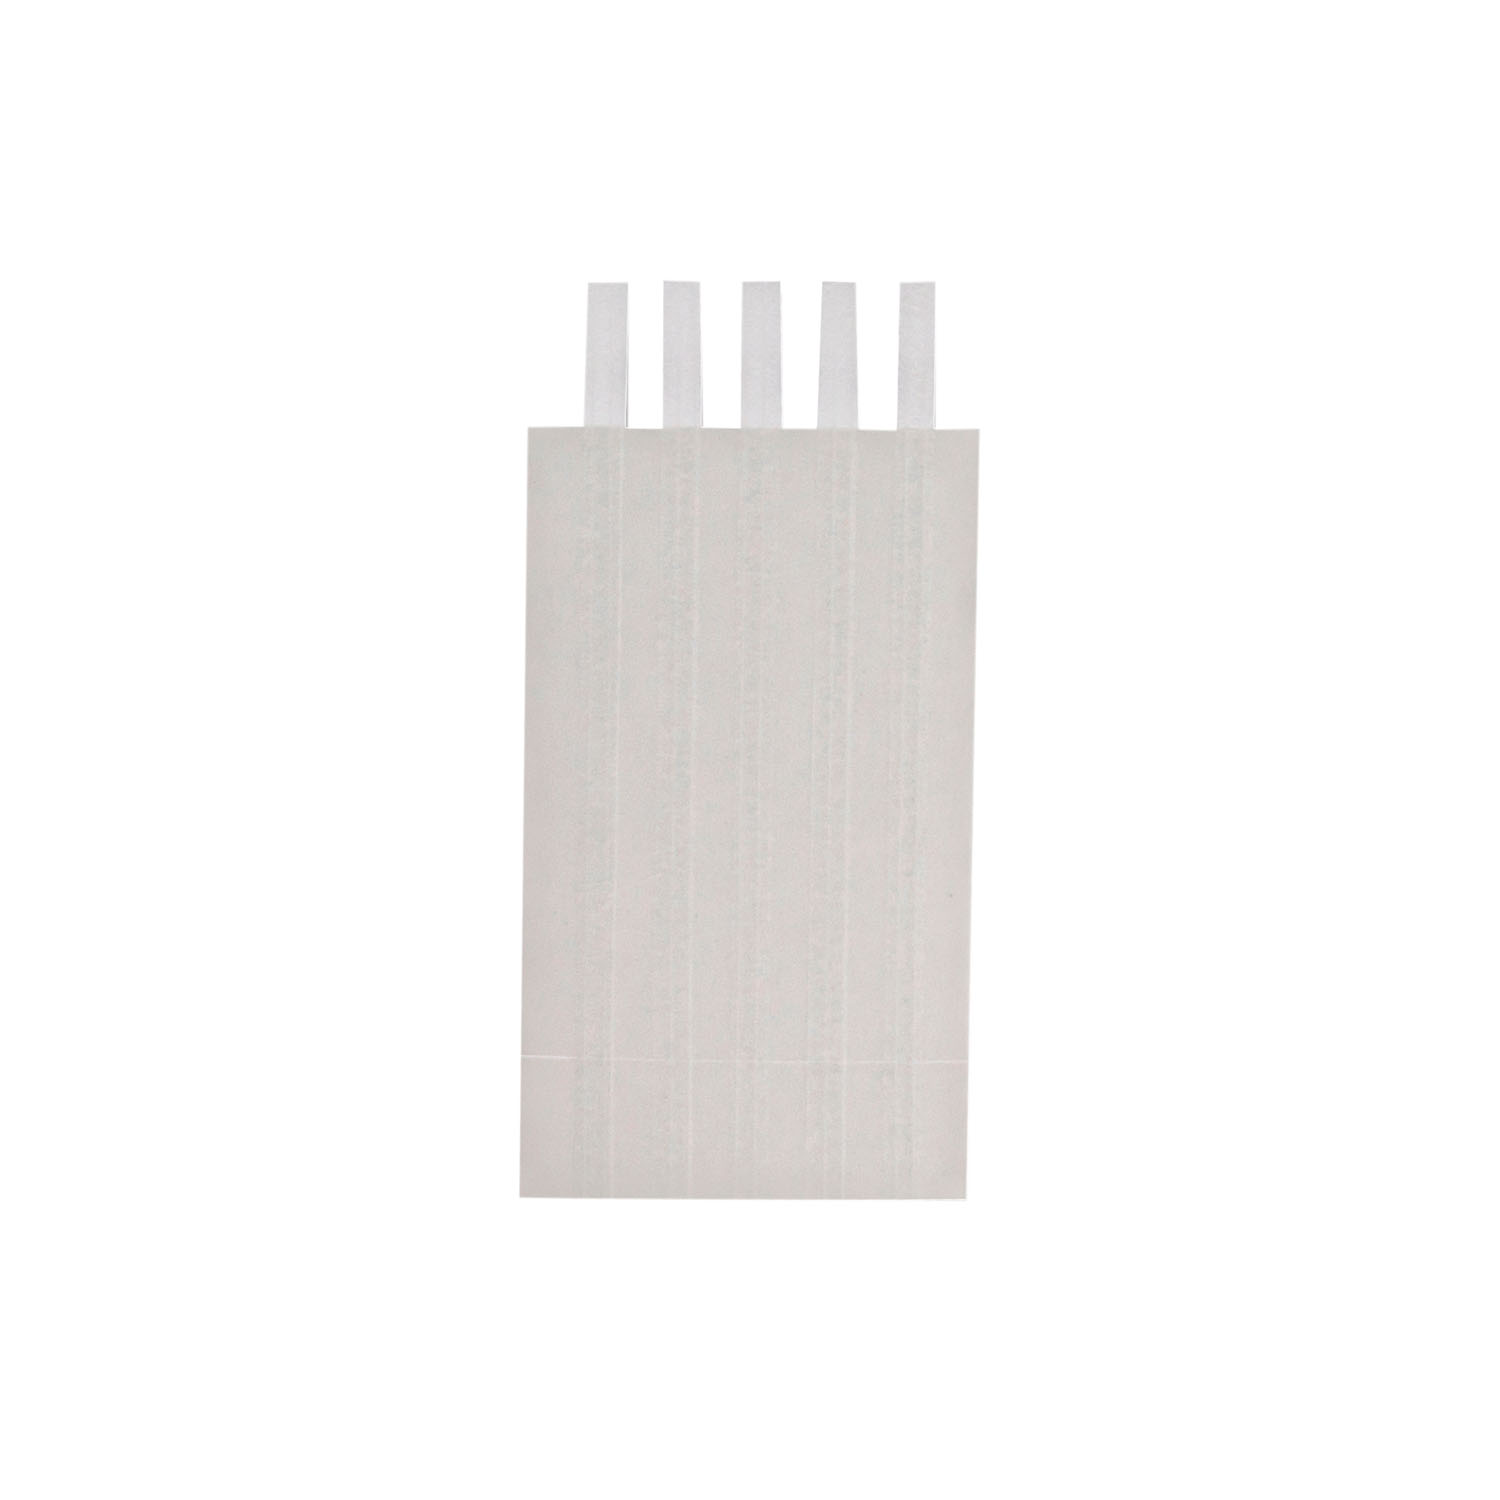 DUKAL WOUND CLOSURE STRIPS : 5150 CS $139.47 Stocked